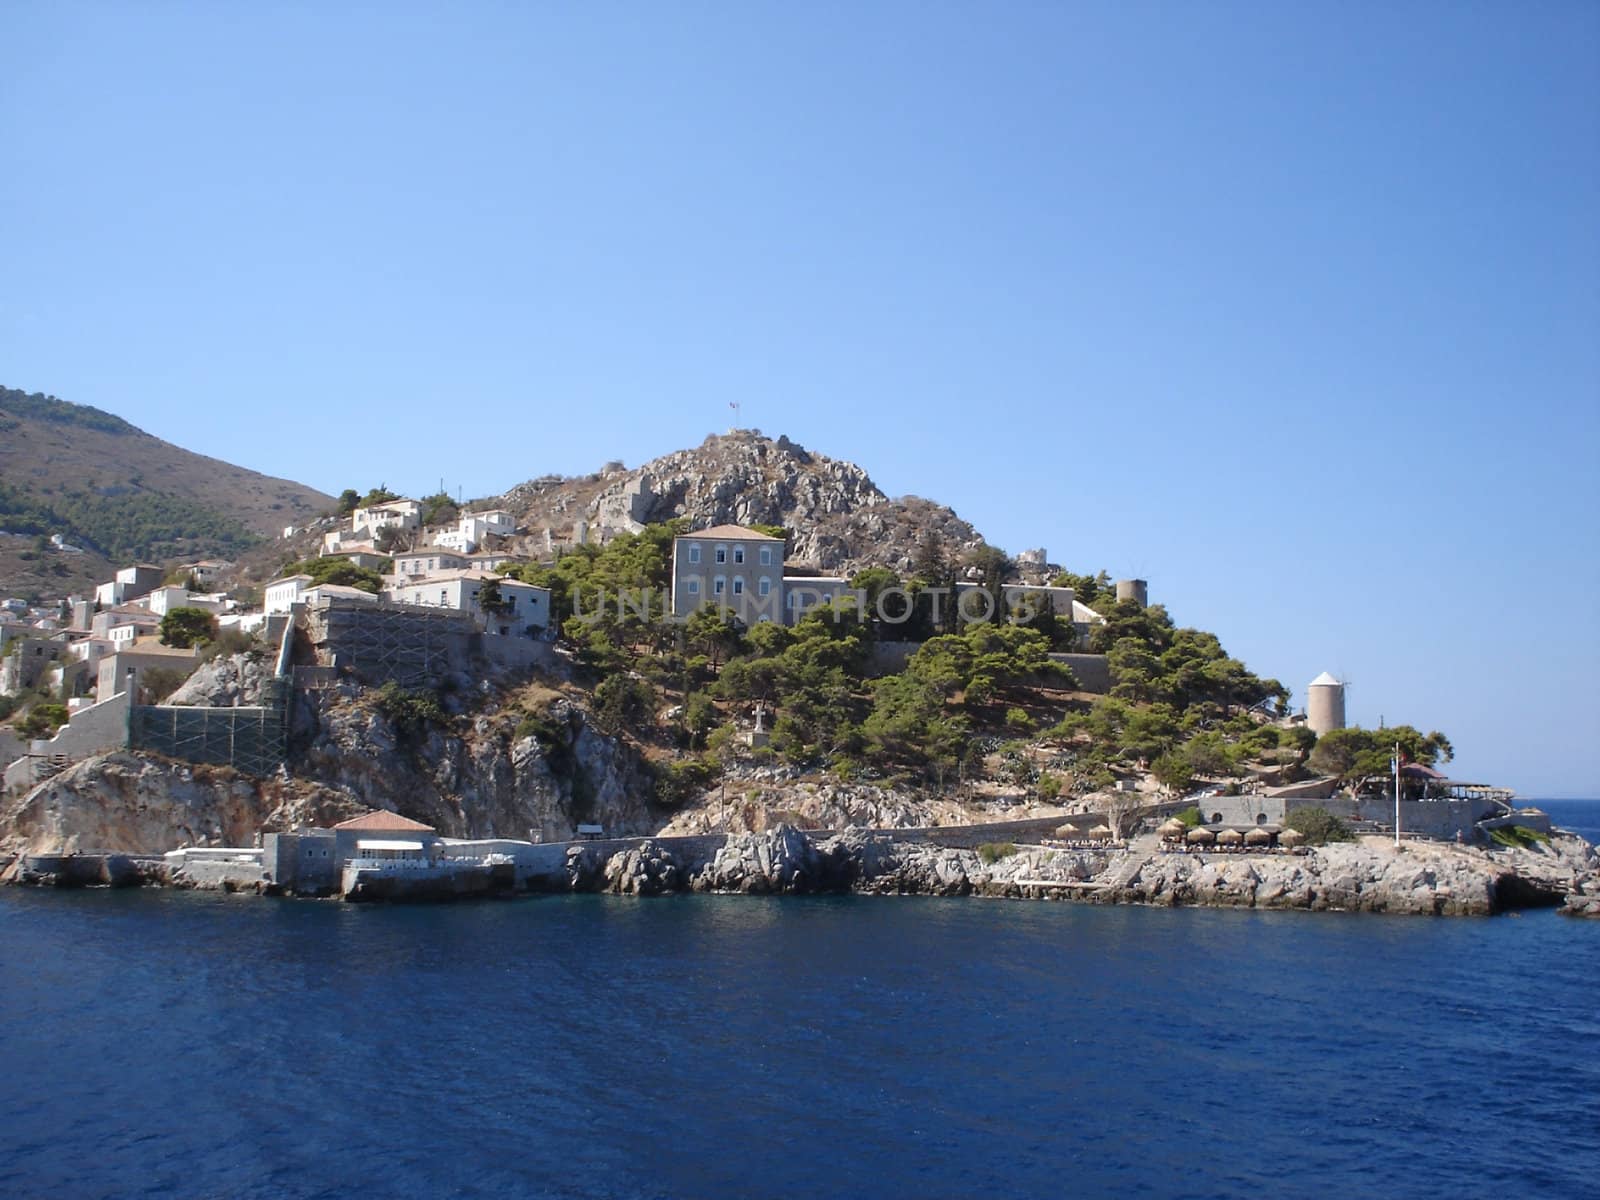 Hydra rocky beach with old buildings by mulden